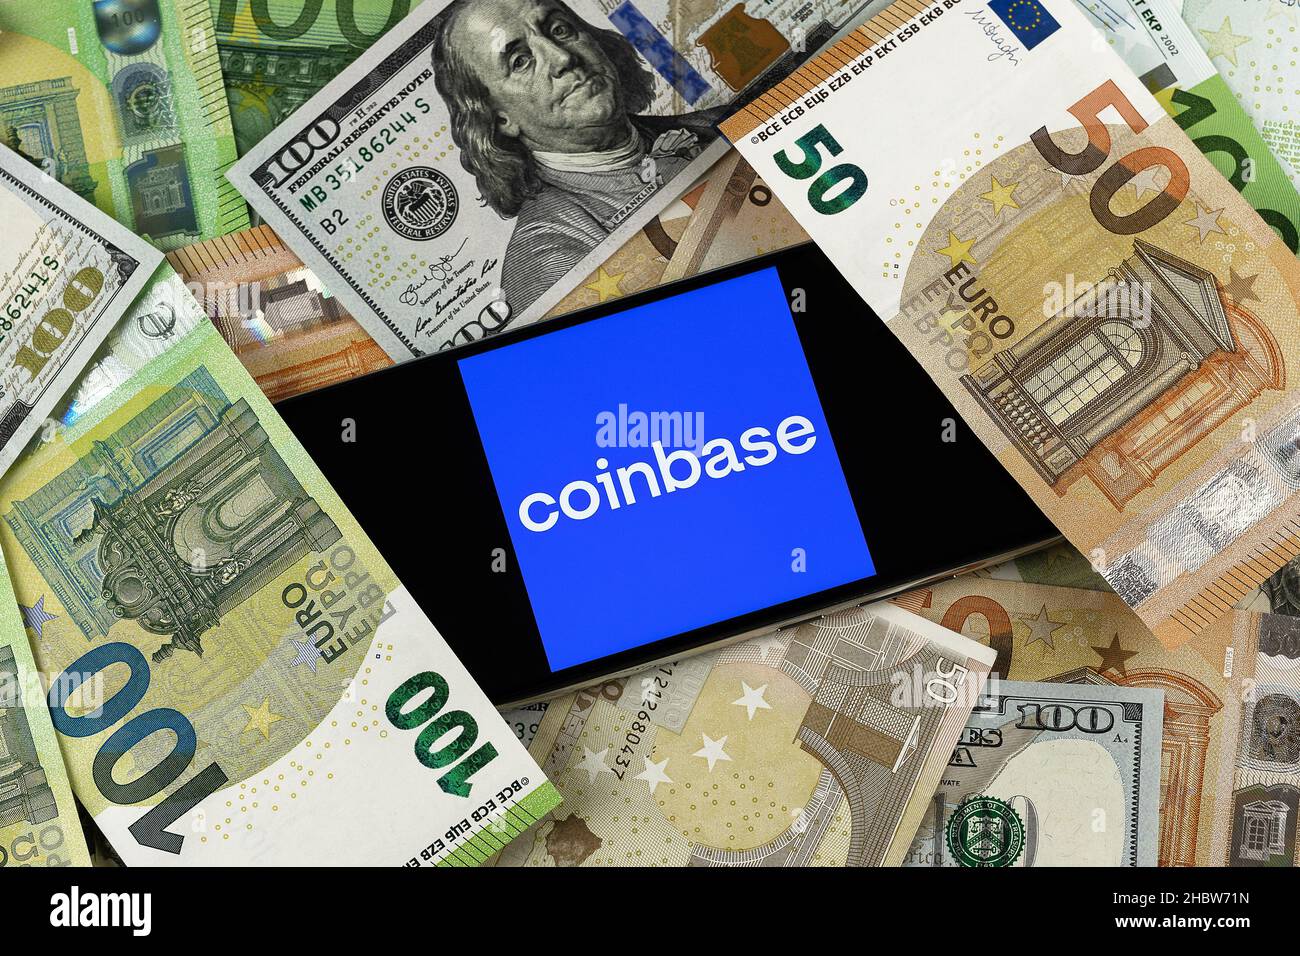 Coinbase editorial. Illustrative photo for news about Coinbase - a company that operates a cryptocurrency exchange platform Stock Photo